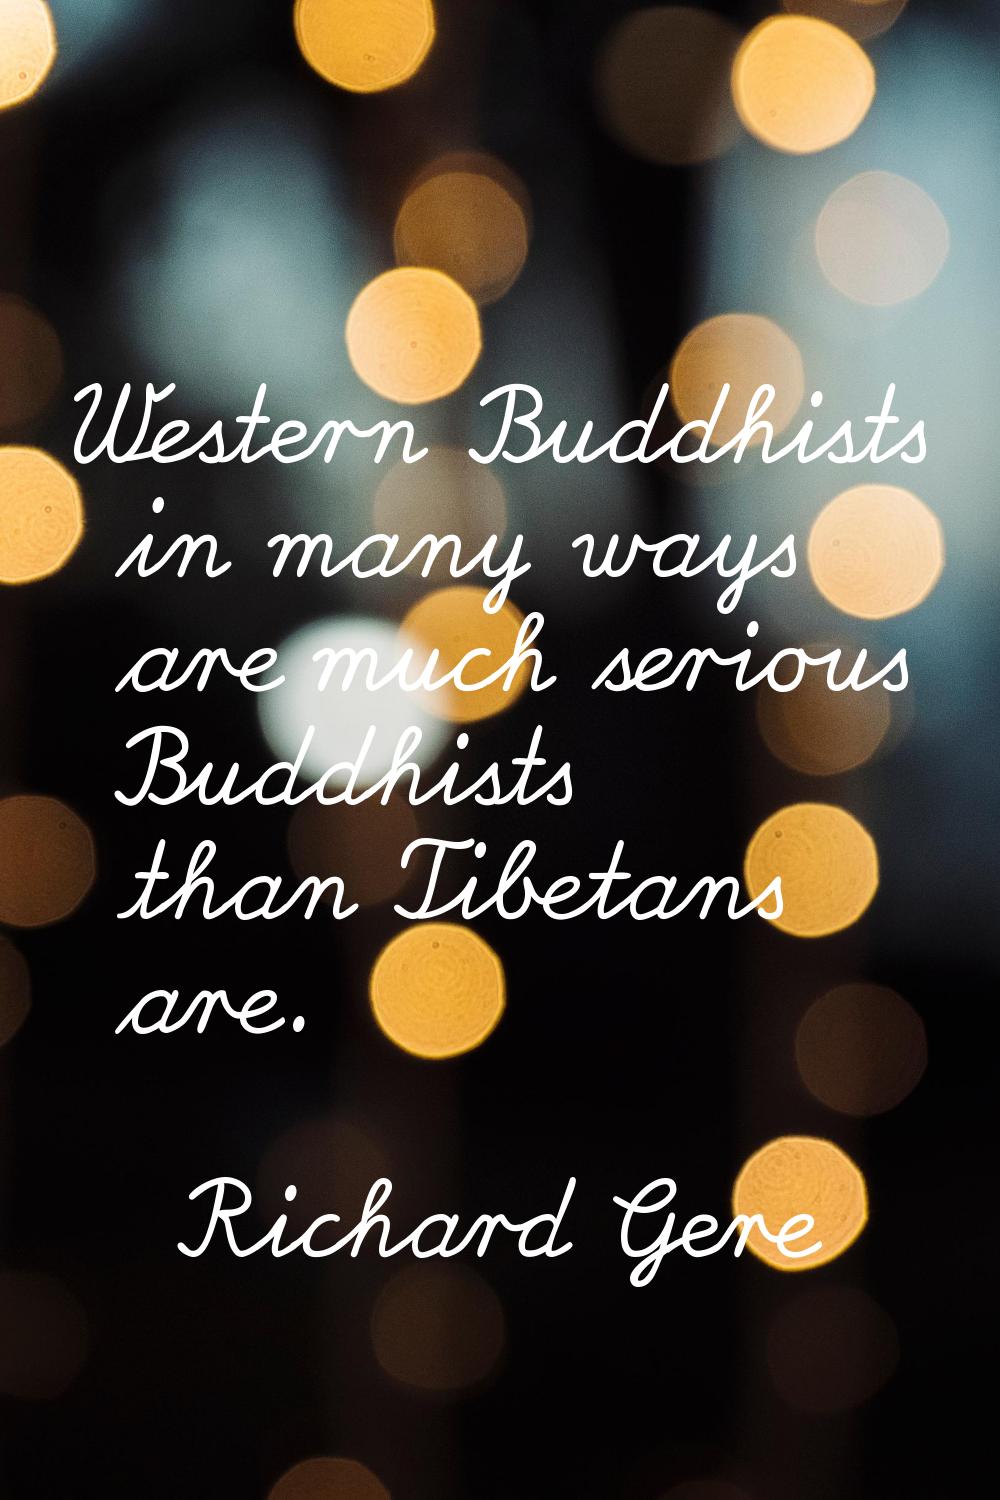 Western Buddhists in many ways are much serious Buddhists than Tibetans are.